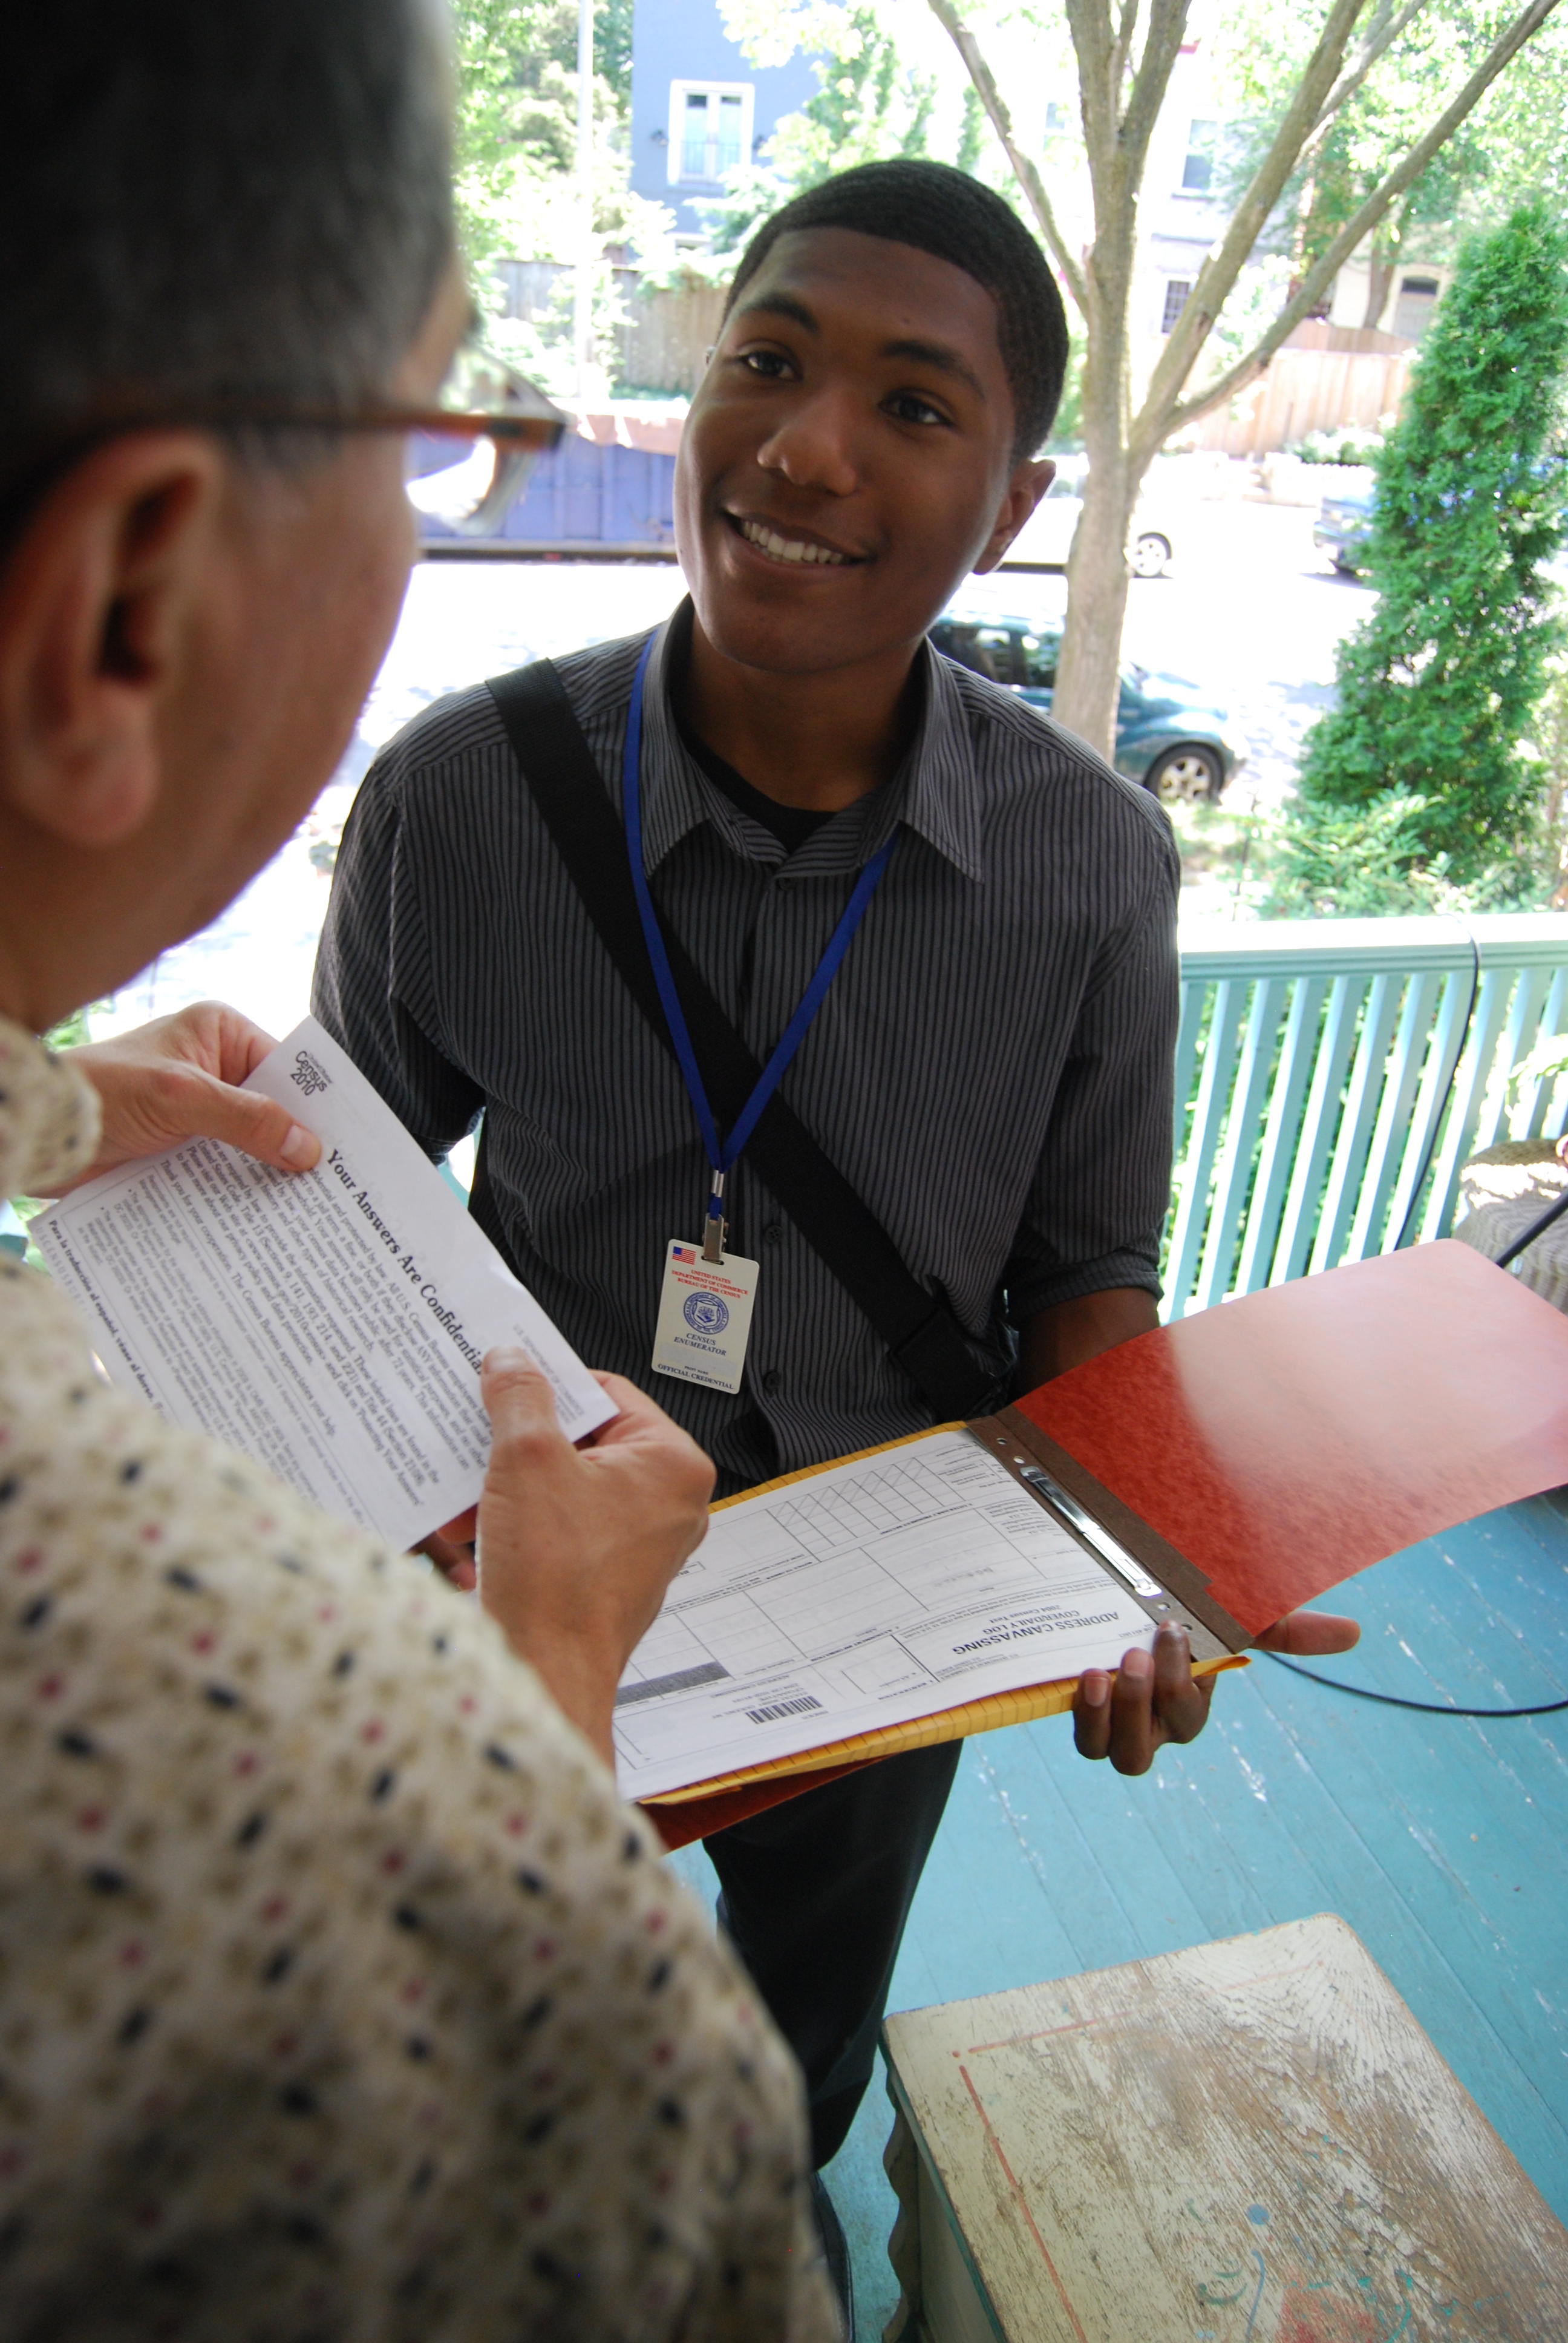 A man with a census enumerator badge is standing on another man's porch holding an open folder with papers in it. A second man, wearing glasses, is in the foreground looking at the census worker standing on his porch.